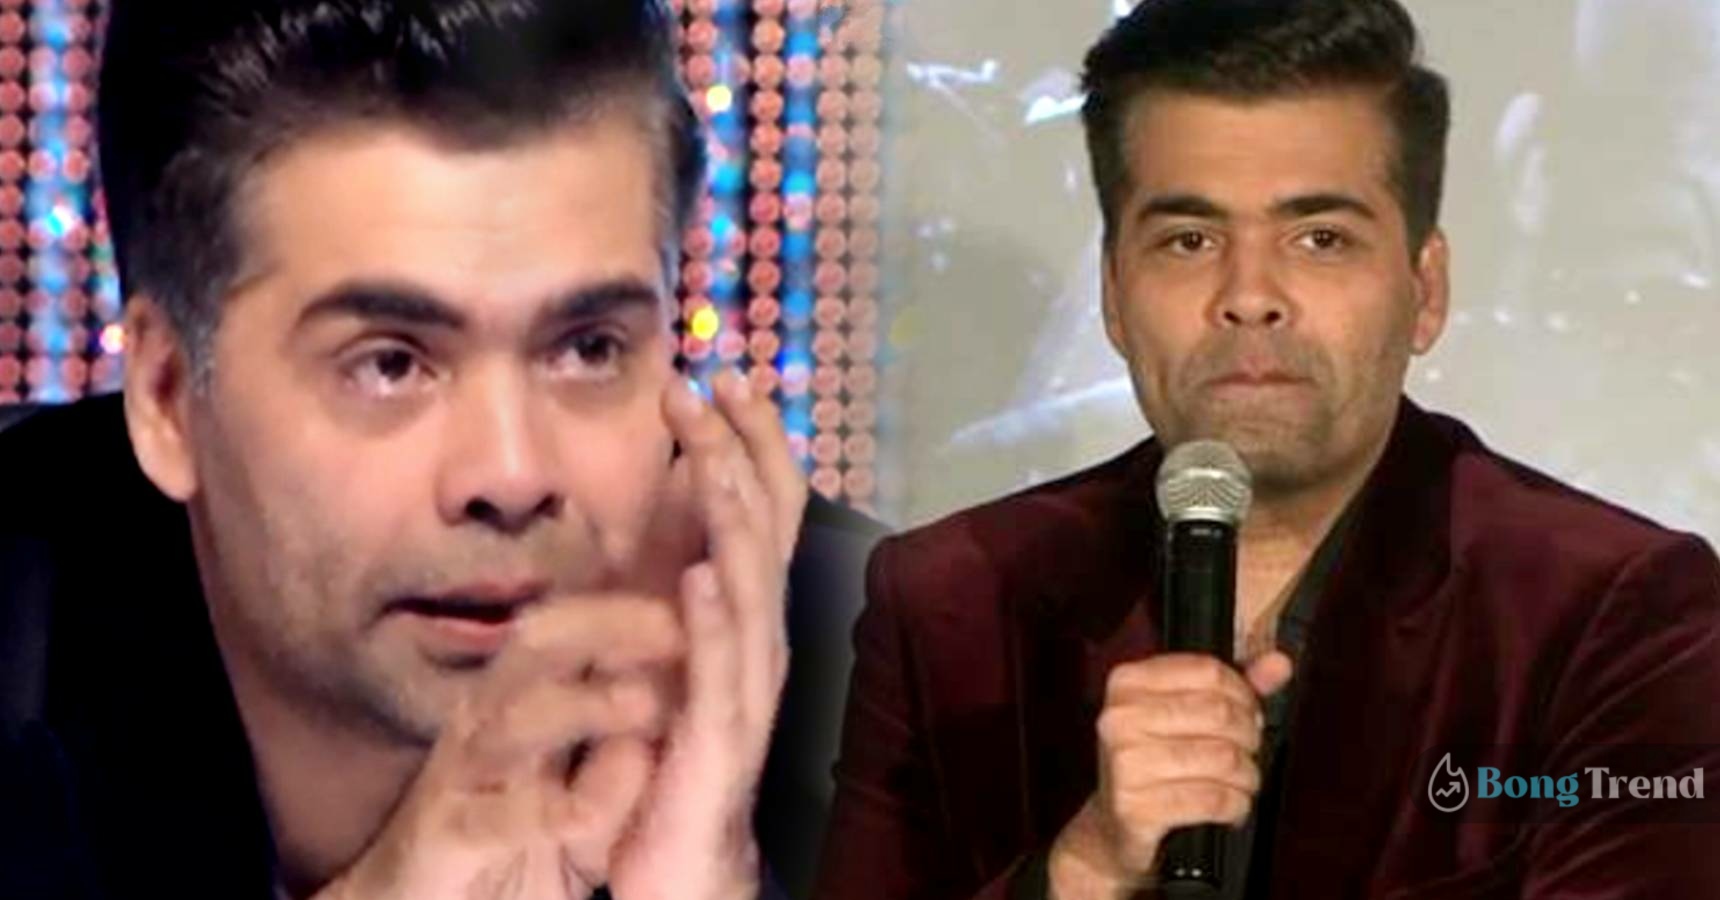 Karan Johar quits twitter, says ‘Making space for more positive energies’